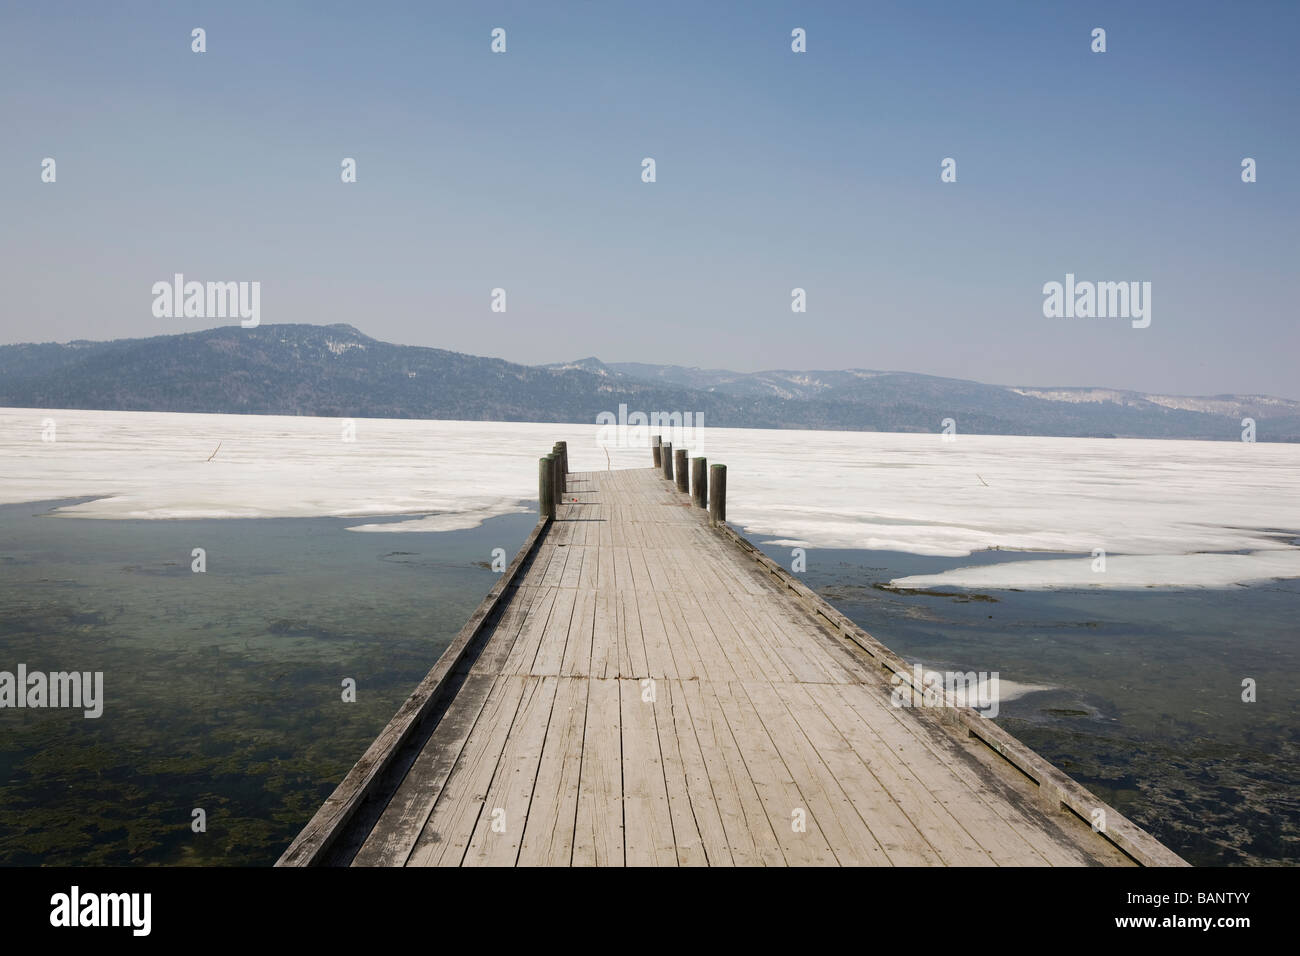 A pier runs out into the frozen waters of Lake Akan Hokkaido Japan on Monday 13th April 2009 Stock Photo